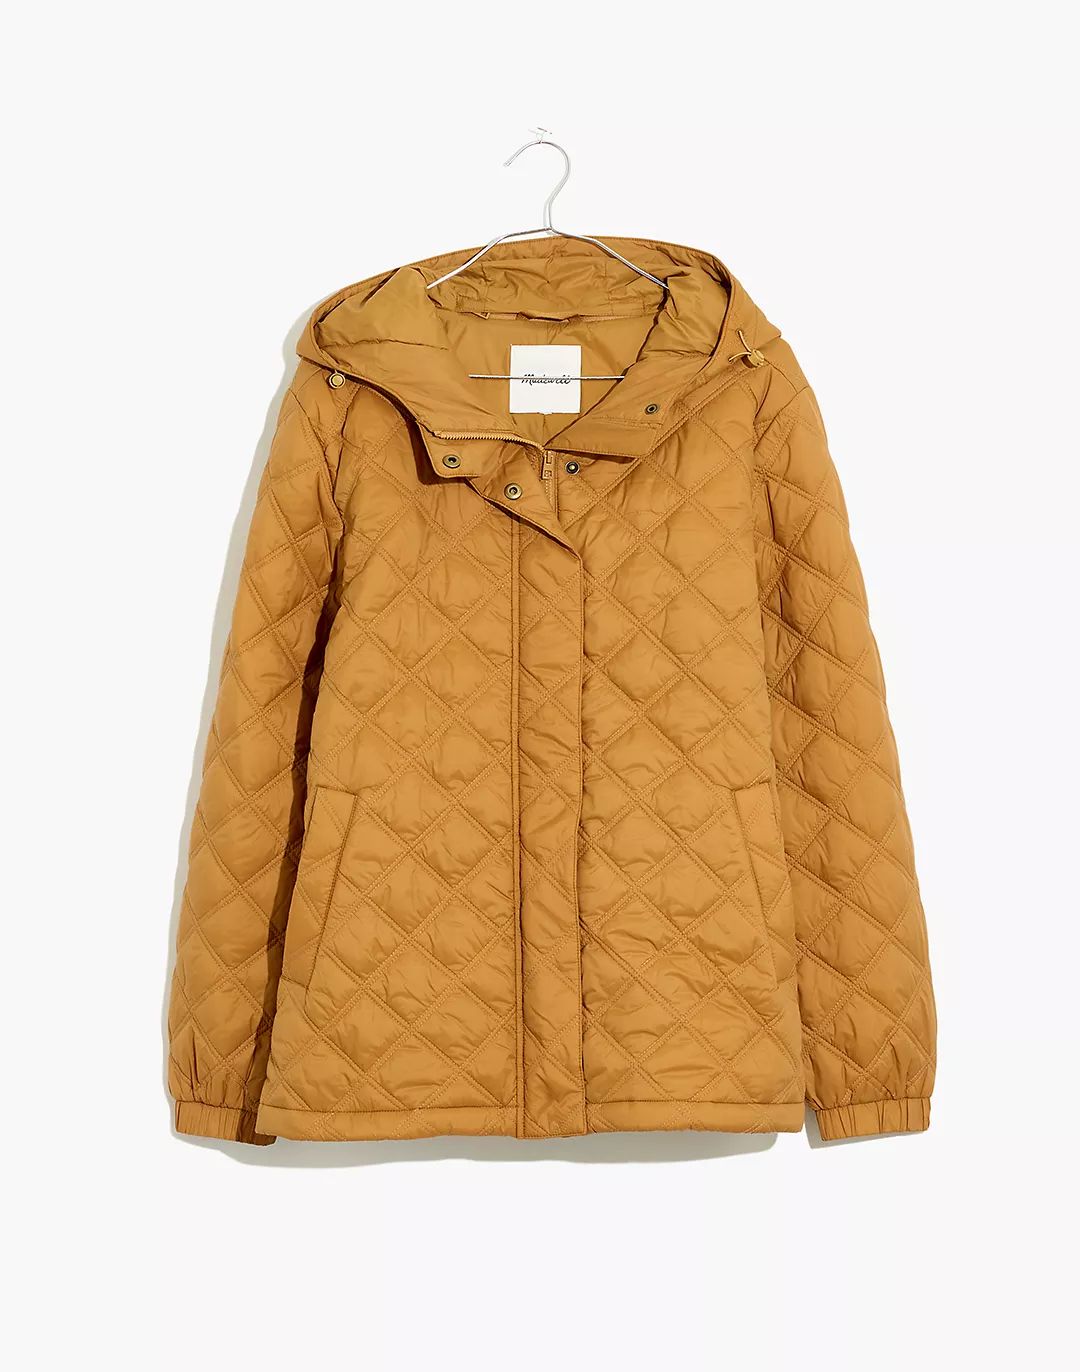 Addition Quilted Packable Puffer Jacket | Madewell